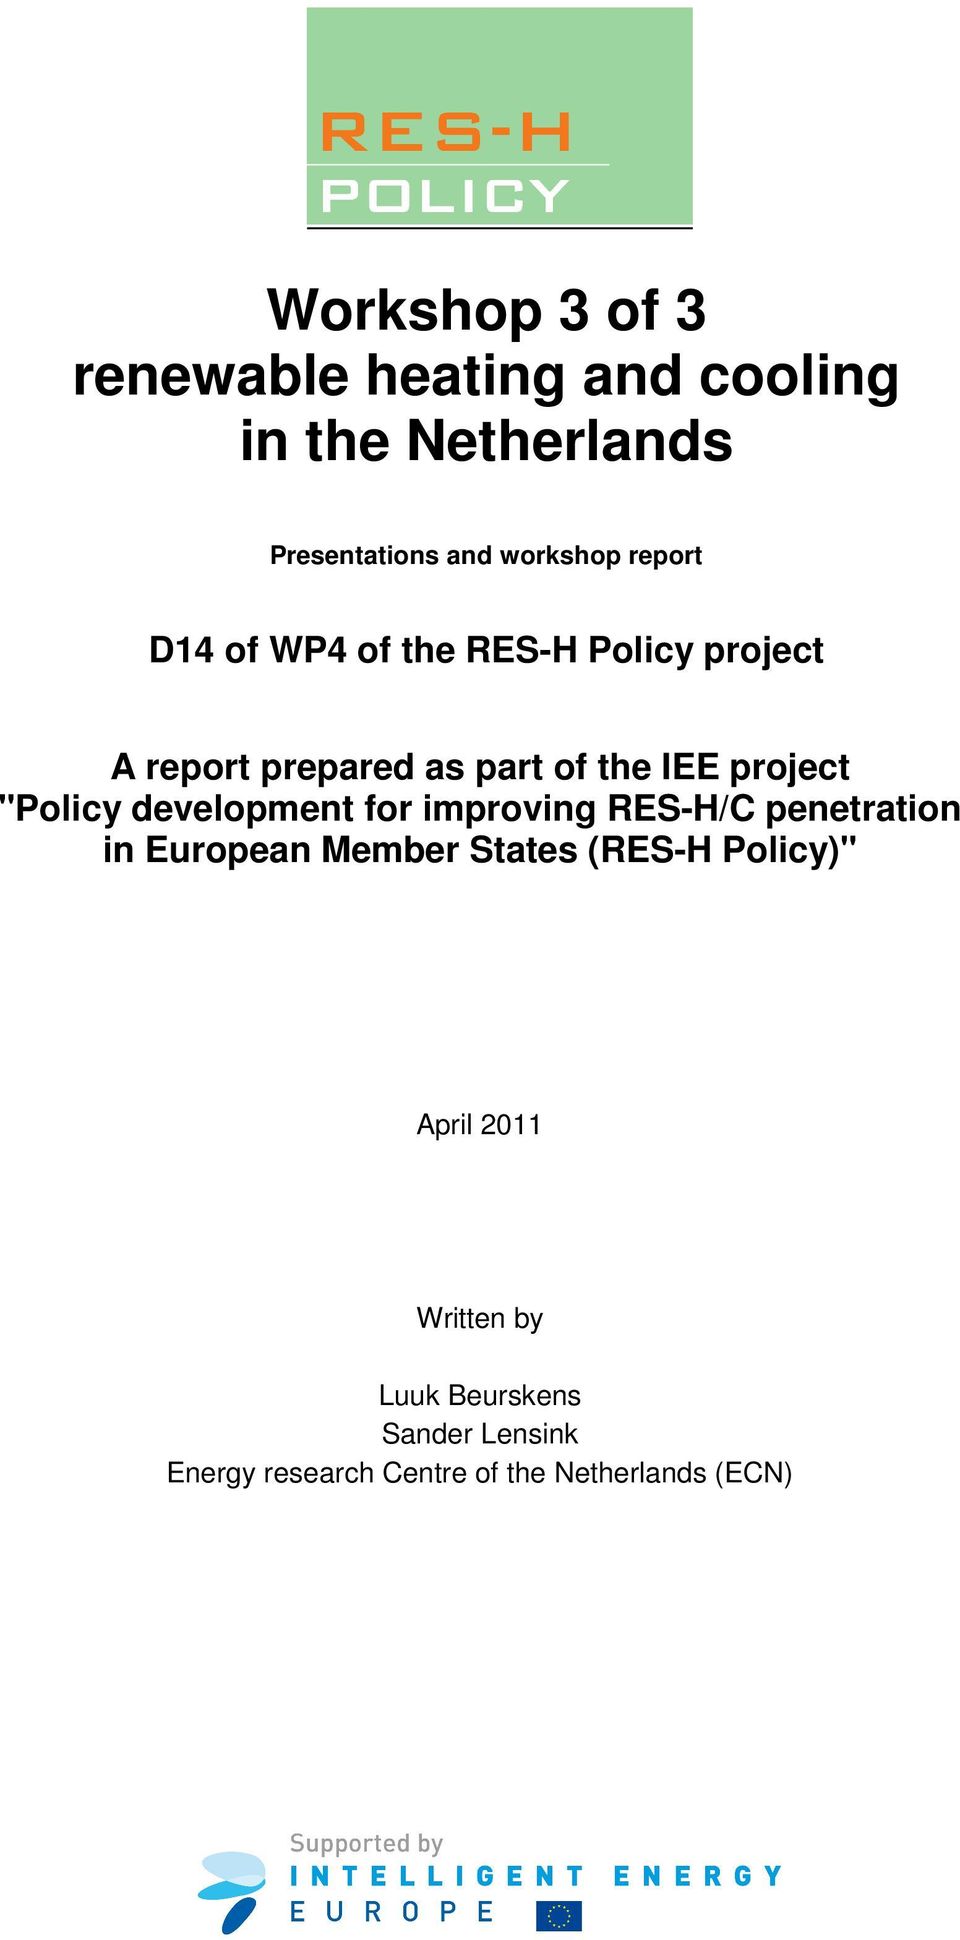 "Policy development for improving RES-H/C penetration in European Member States (RES-H